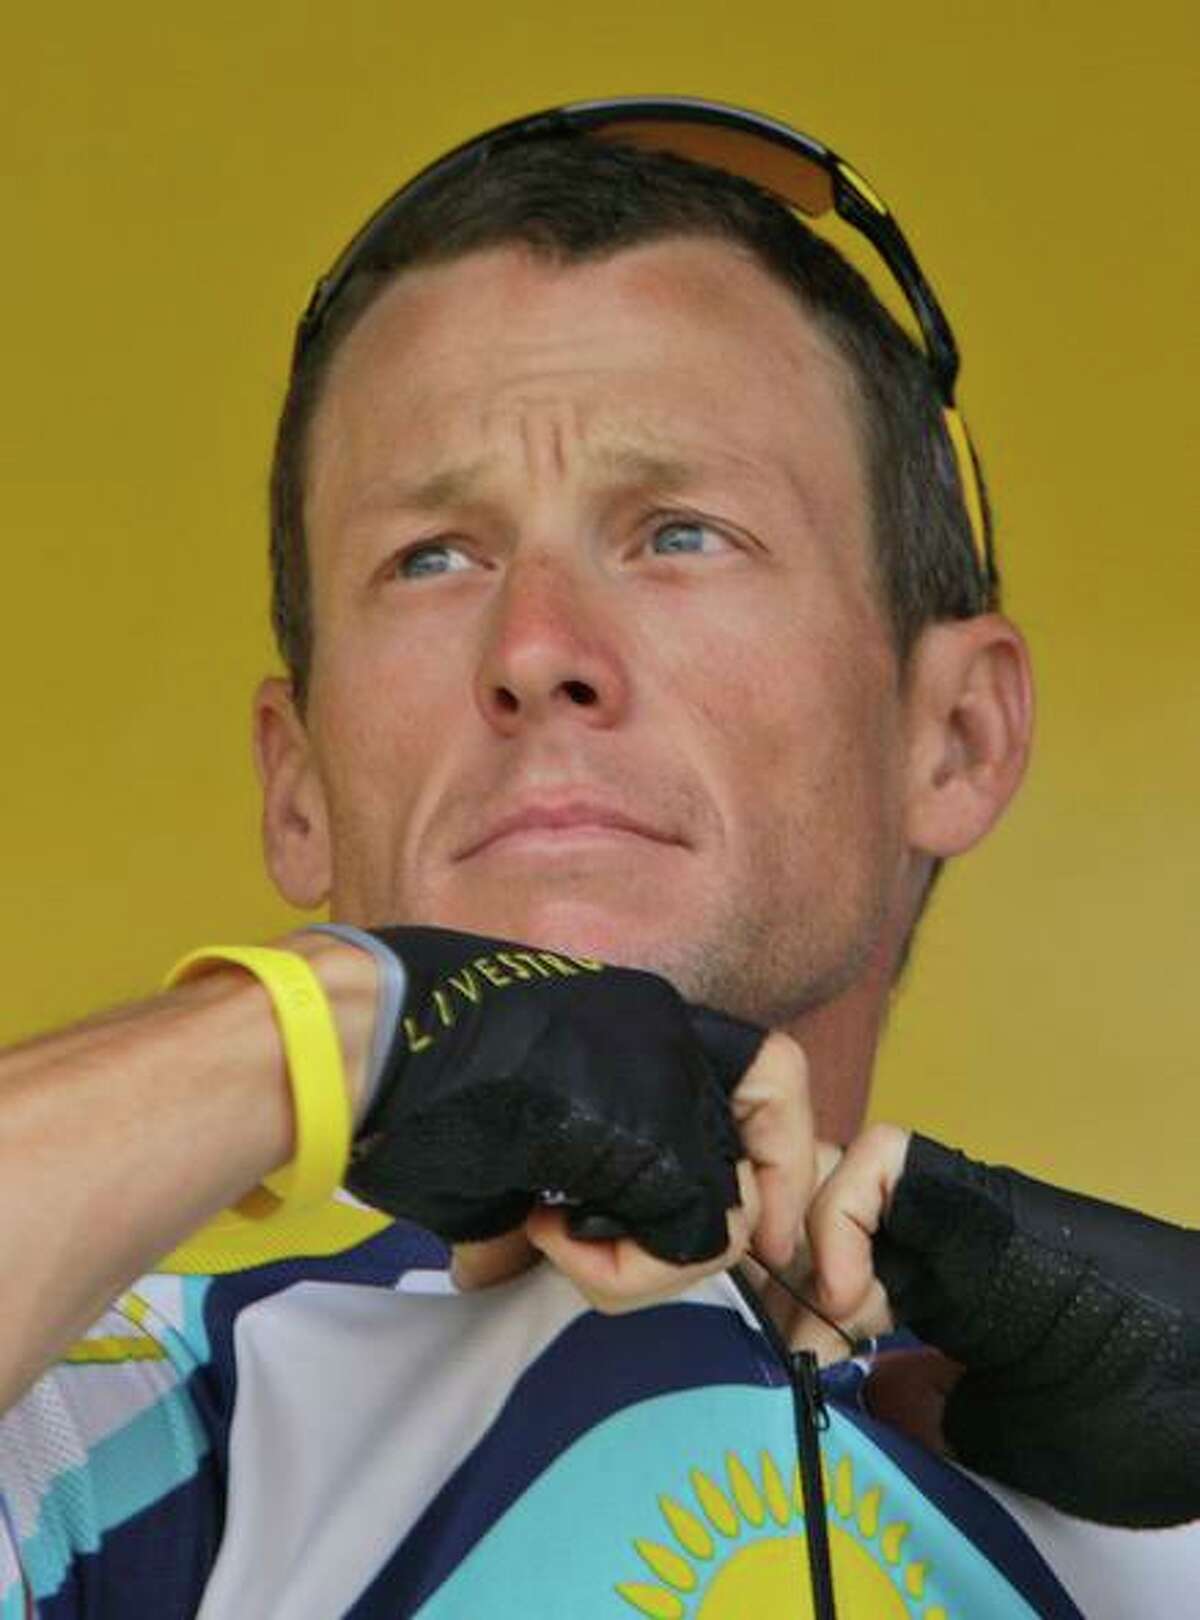 Lance Armstrong captivated America with championships that were later taken away.